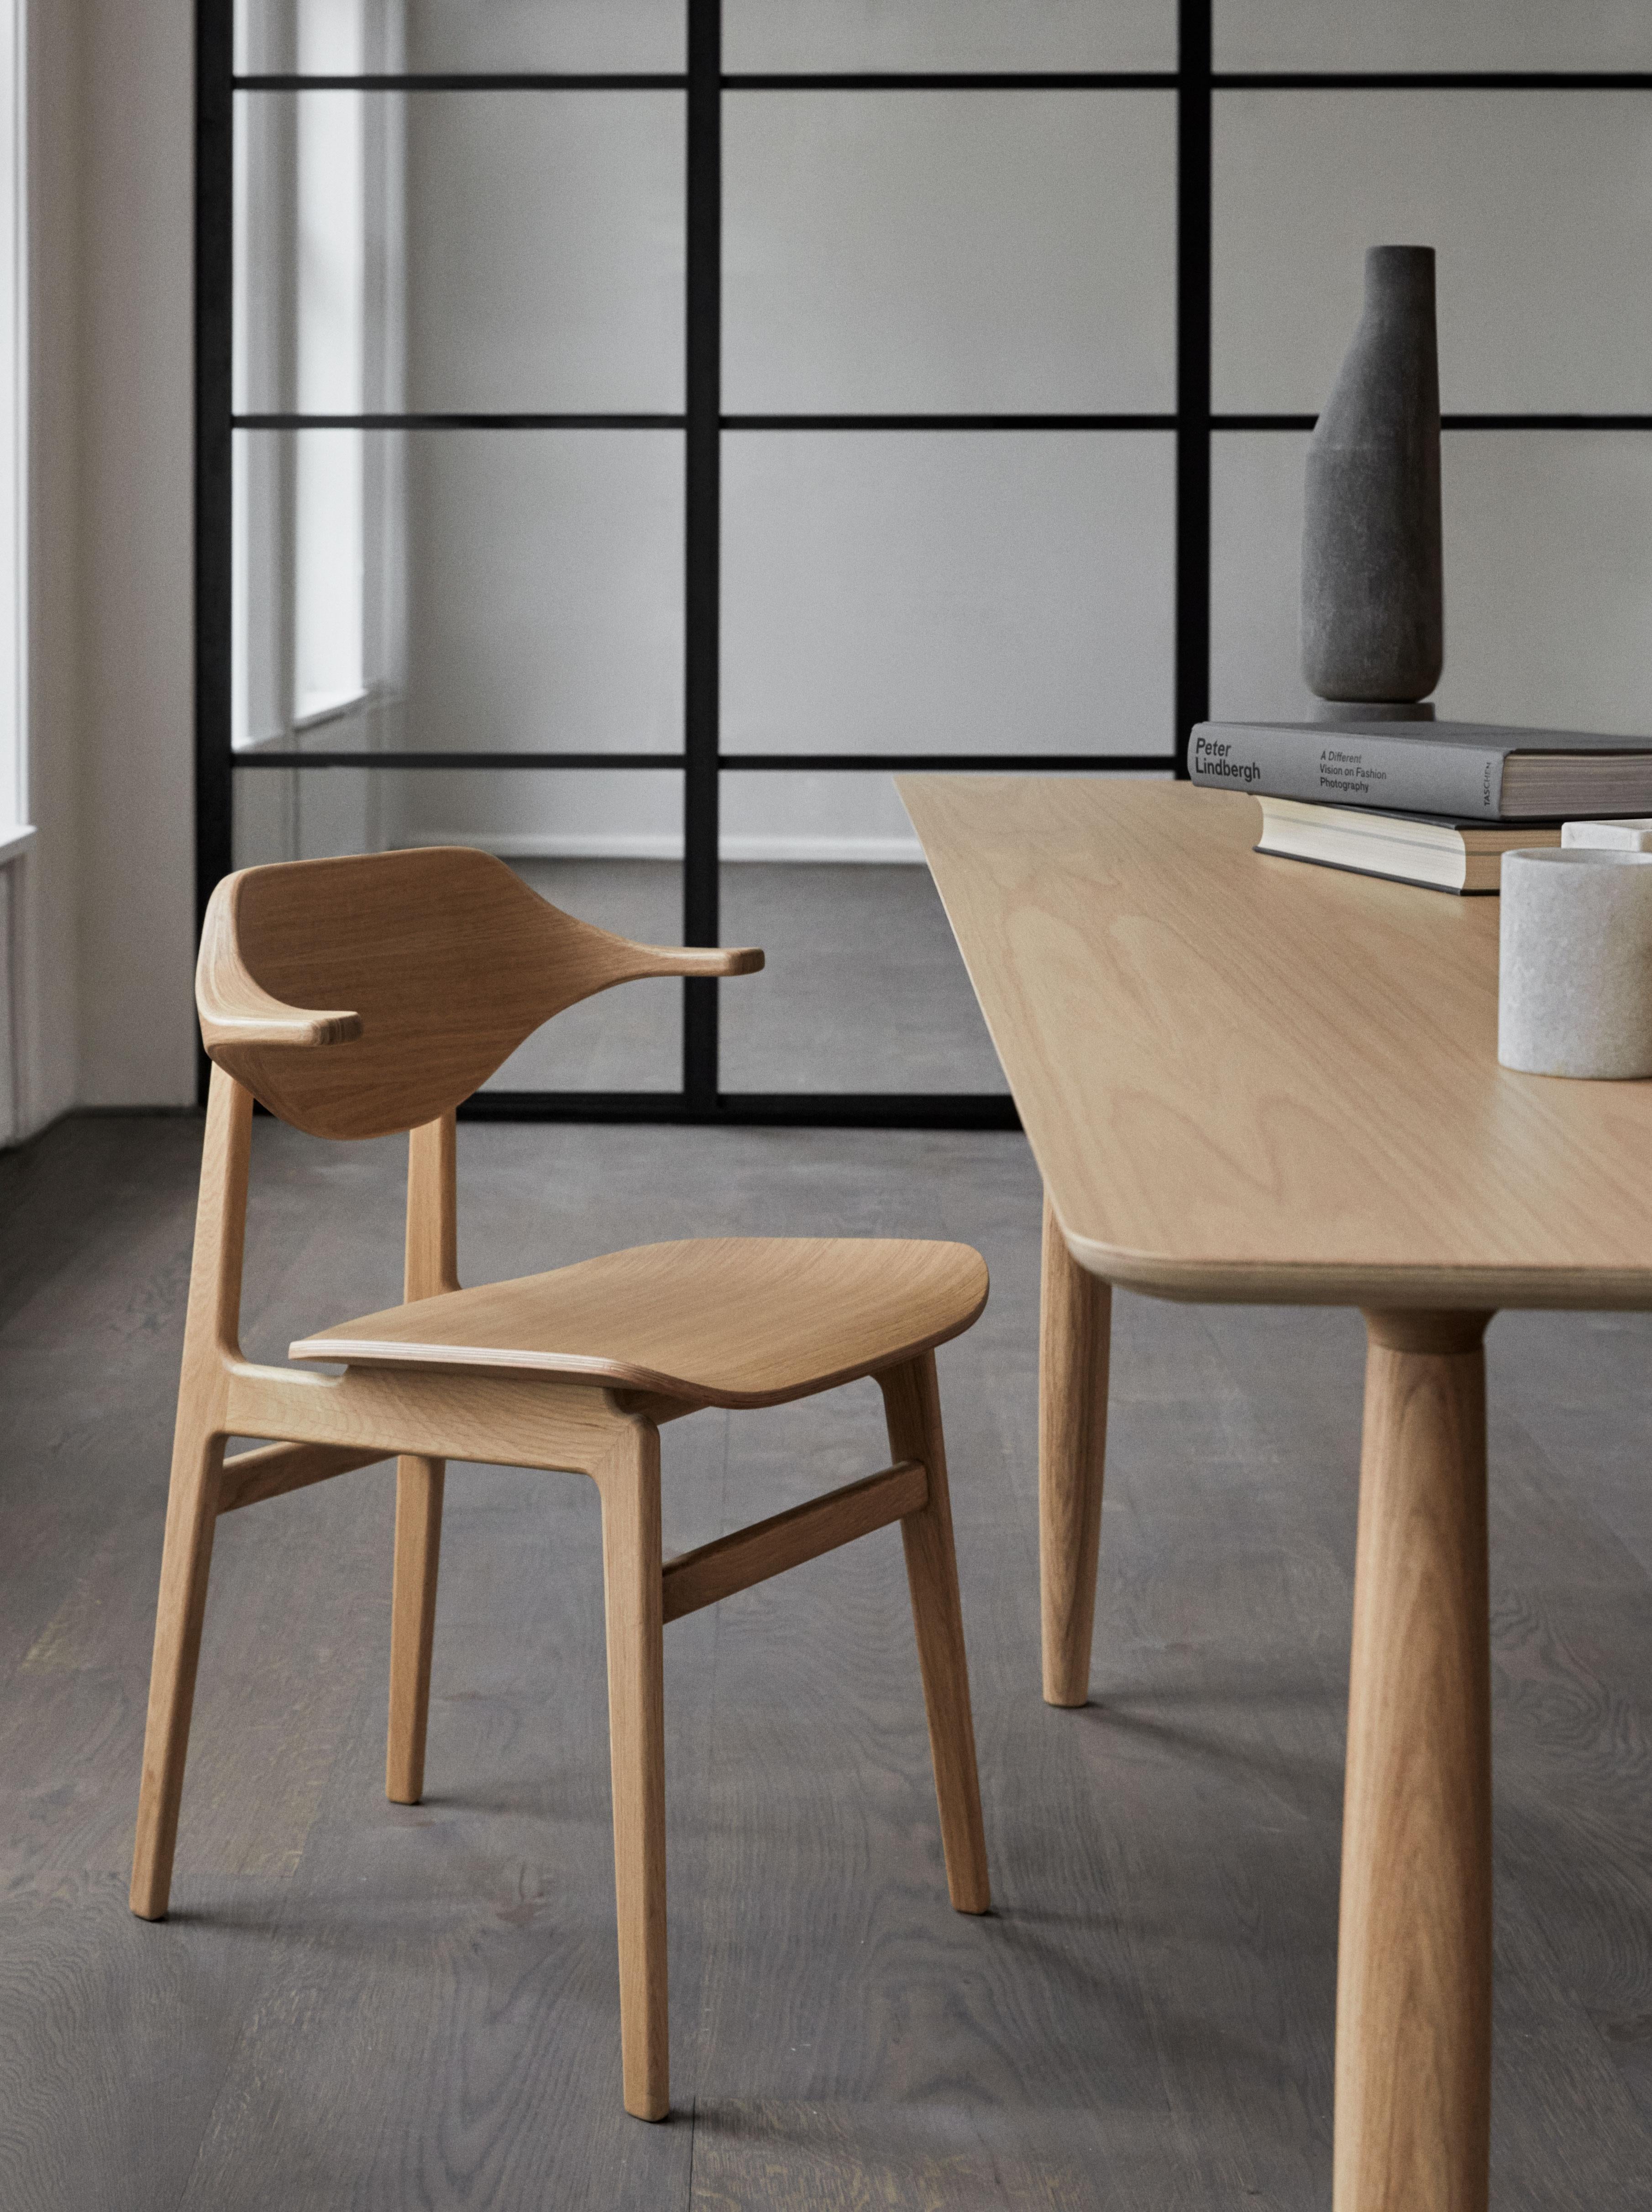 Bufala Chair by NORR11
Dimensions: D 50,5 x W 54,5 x H 75 cm. SH 45,5 cm. Armrest height: 67,5 cm.
Materials: Black oak and upholstery.
Upholstery: Barnum Bouclé Col. 3.

Available in different oak finishes: Natural oak, light smoked oak, dark